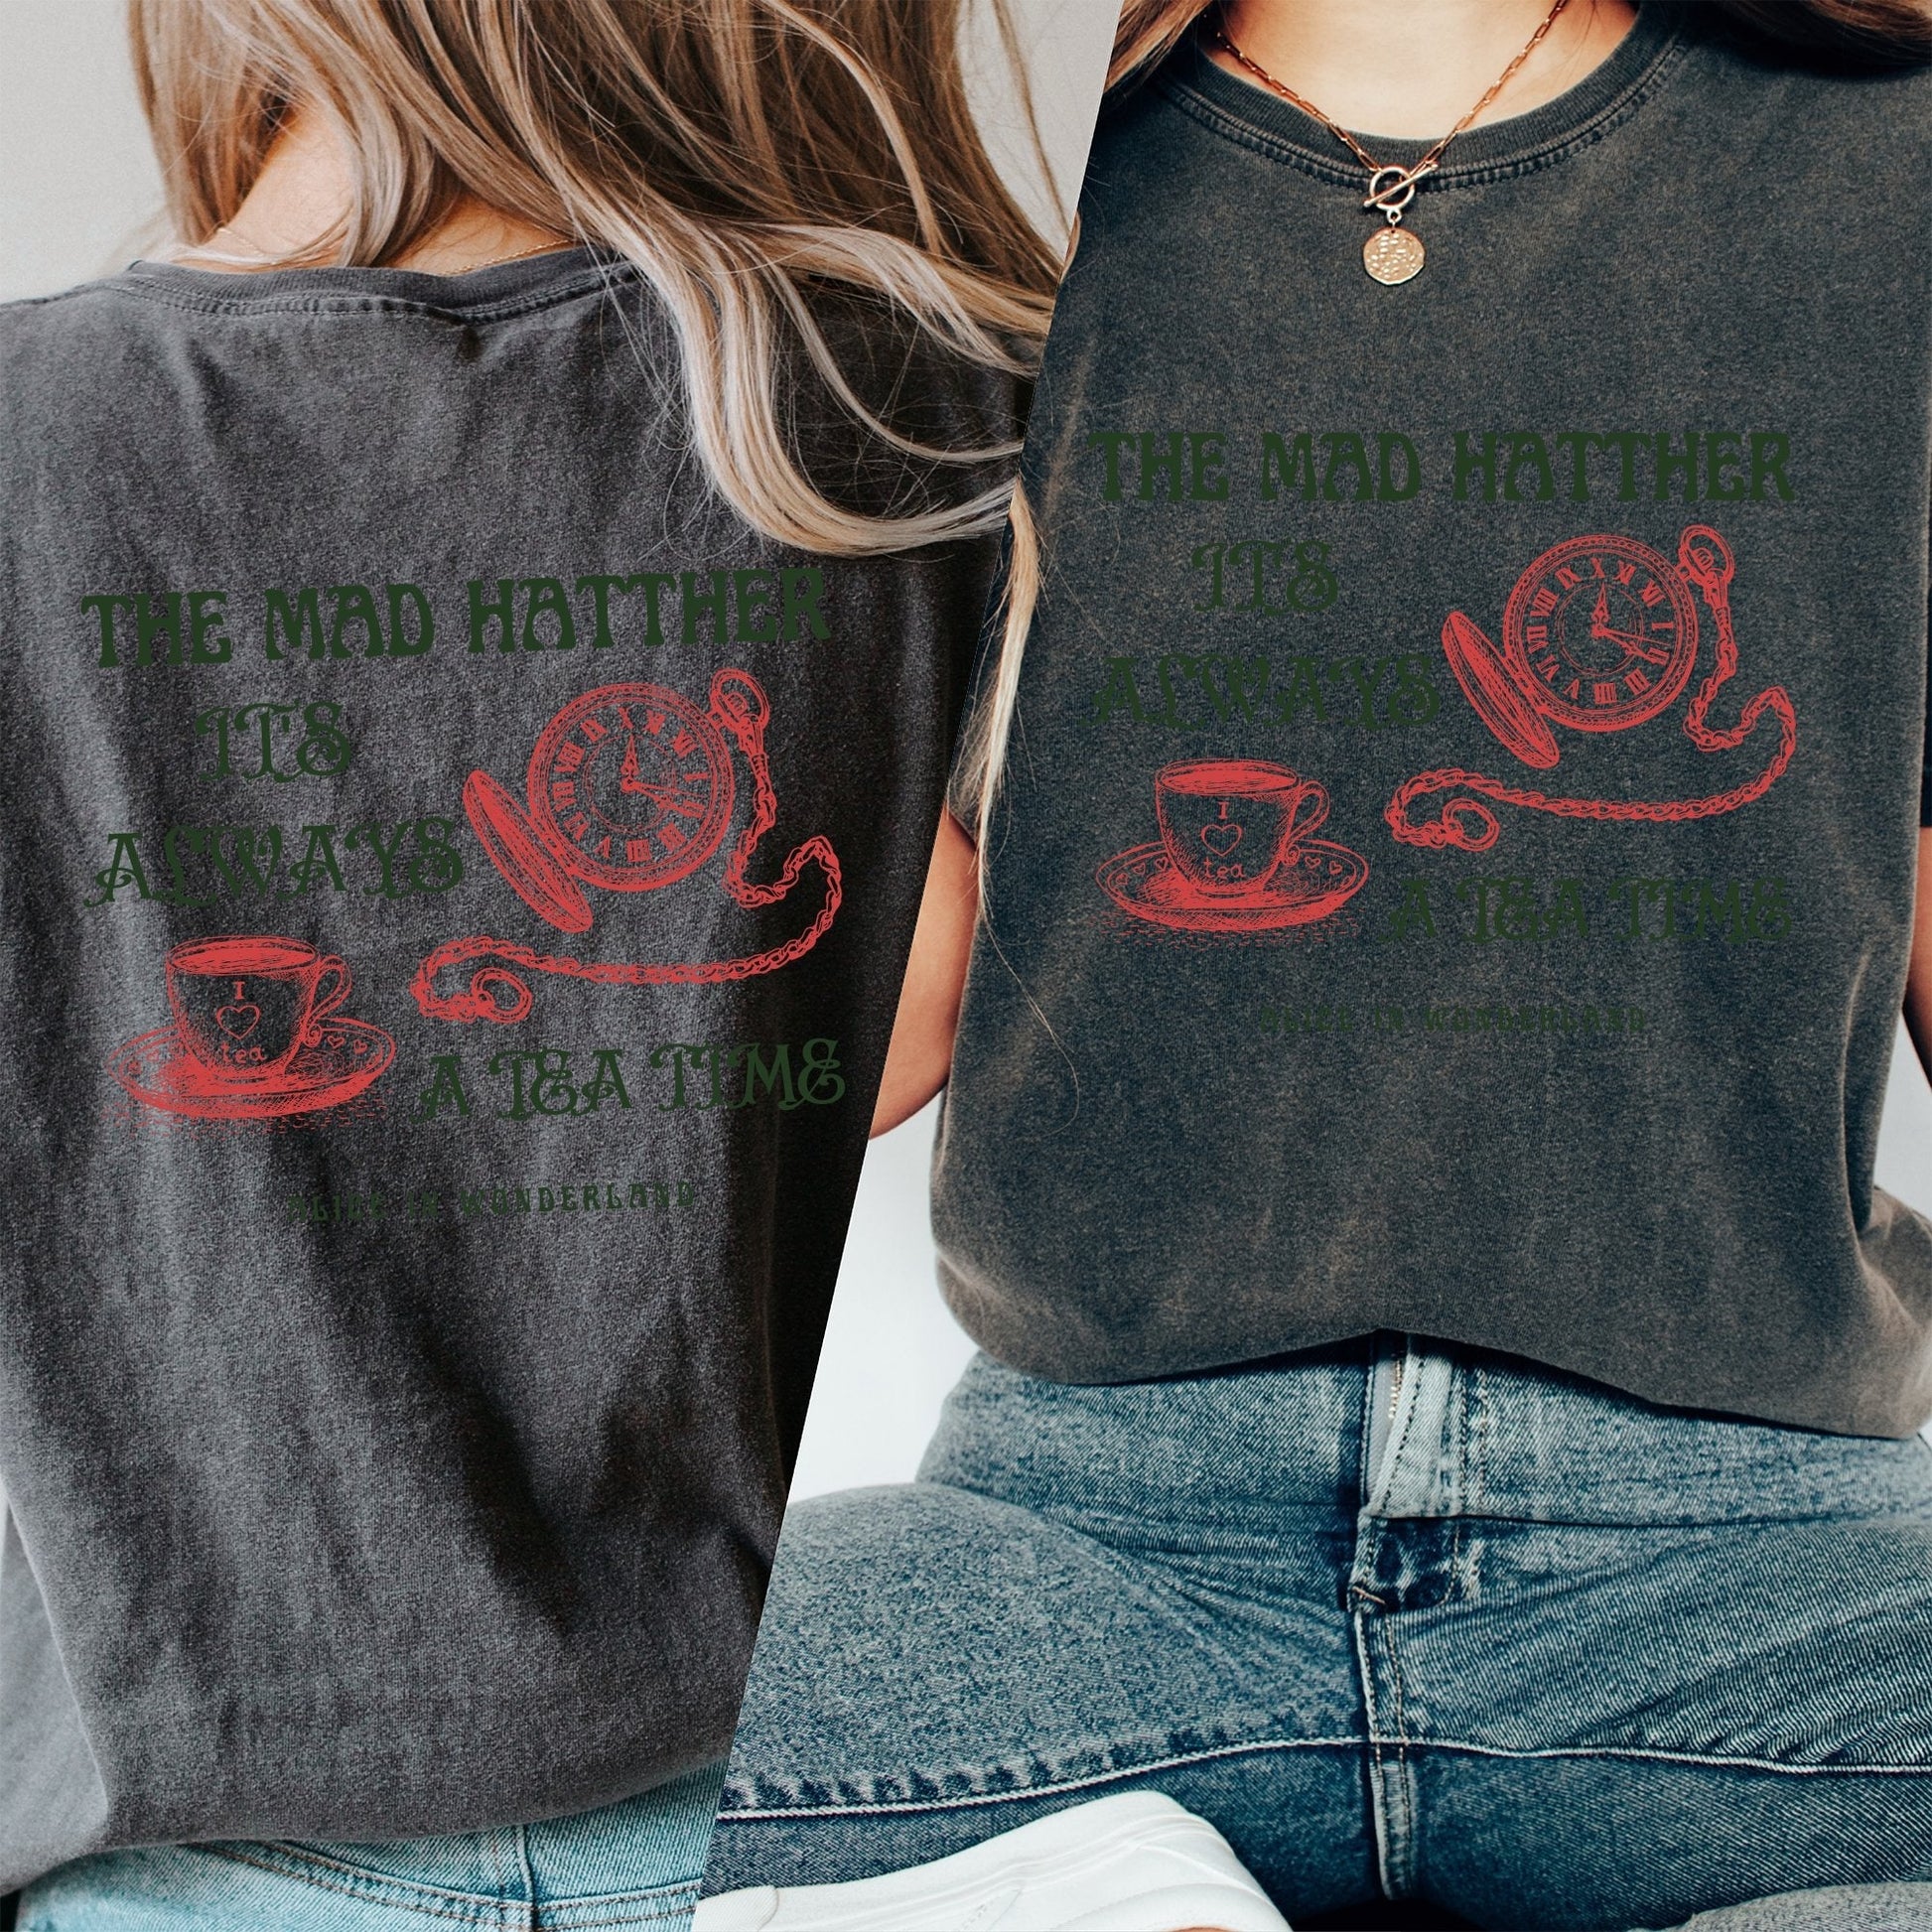 The Mad Hatter It's Always A Tea Time T-Shirt Tee Shirt Ladies Unisex Funny Humor Gift Present Birthday Alice in Wonderland Tea Party - AFADesignsCo